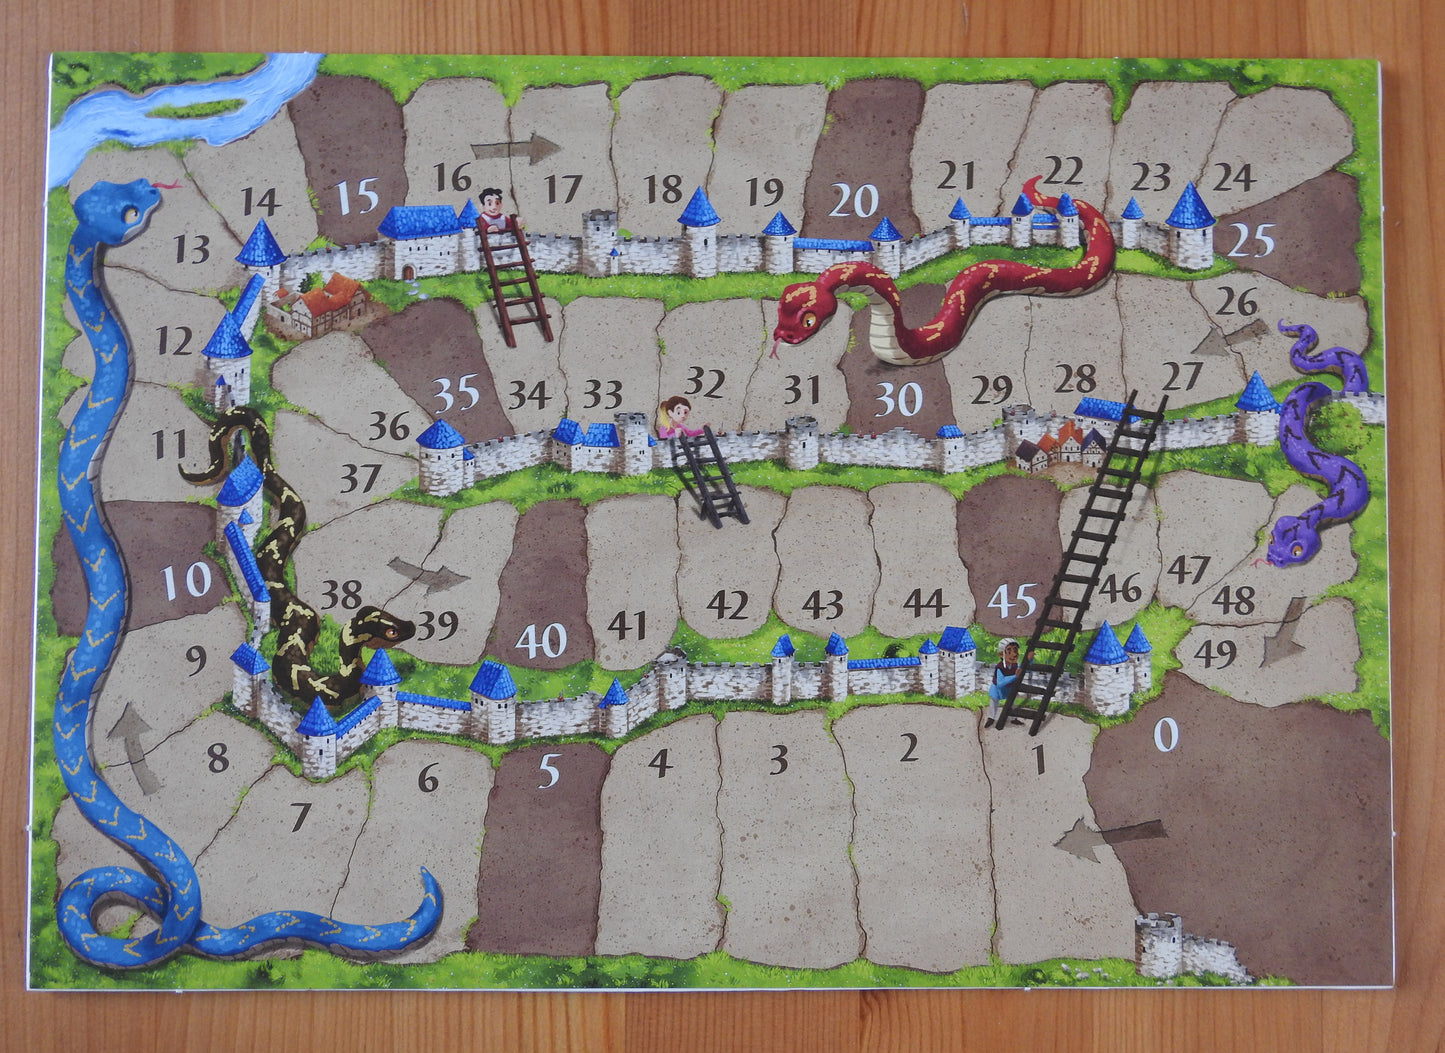 View of the Snakes & Ladders Scoreboard mini expansion and accessory for Carcassonne.